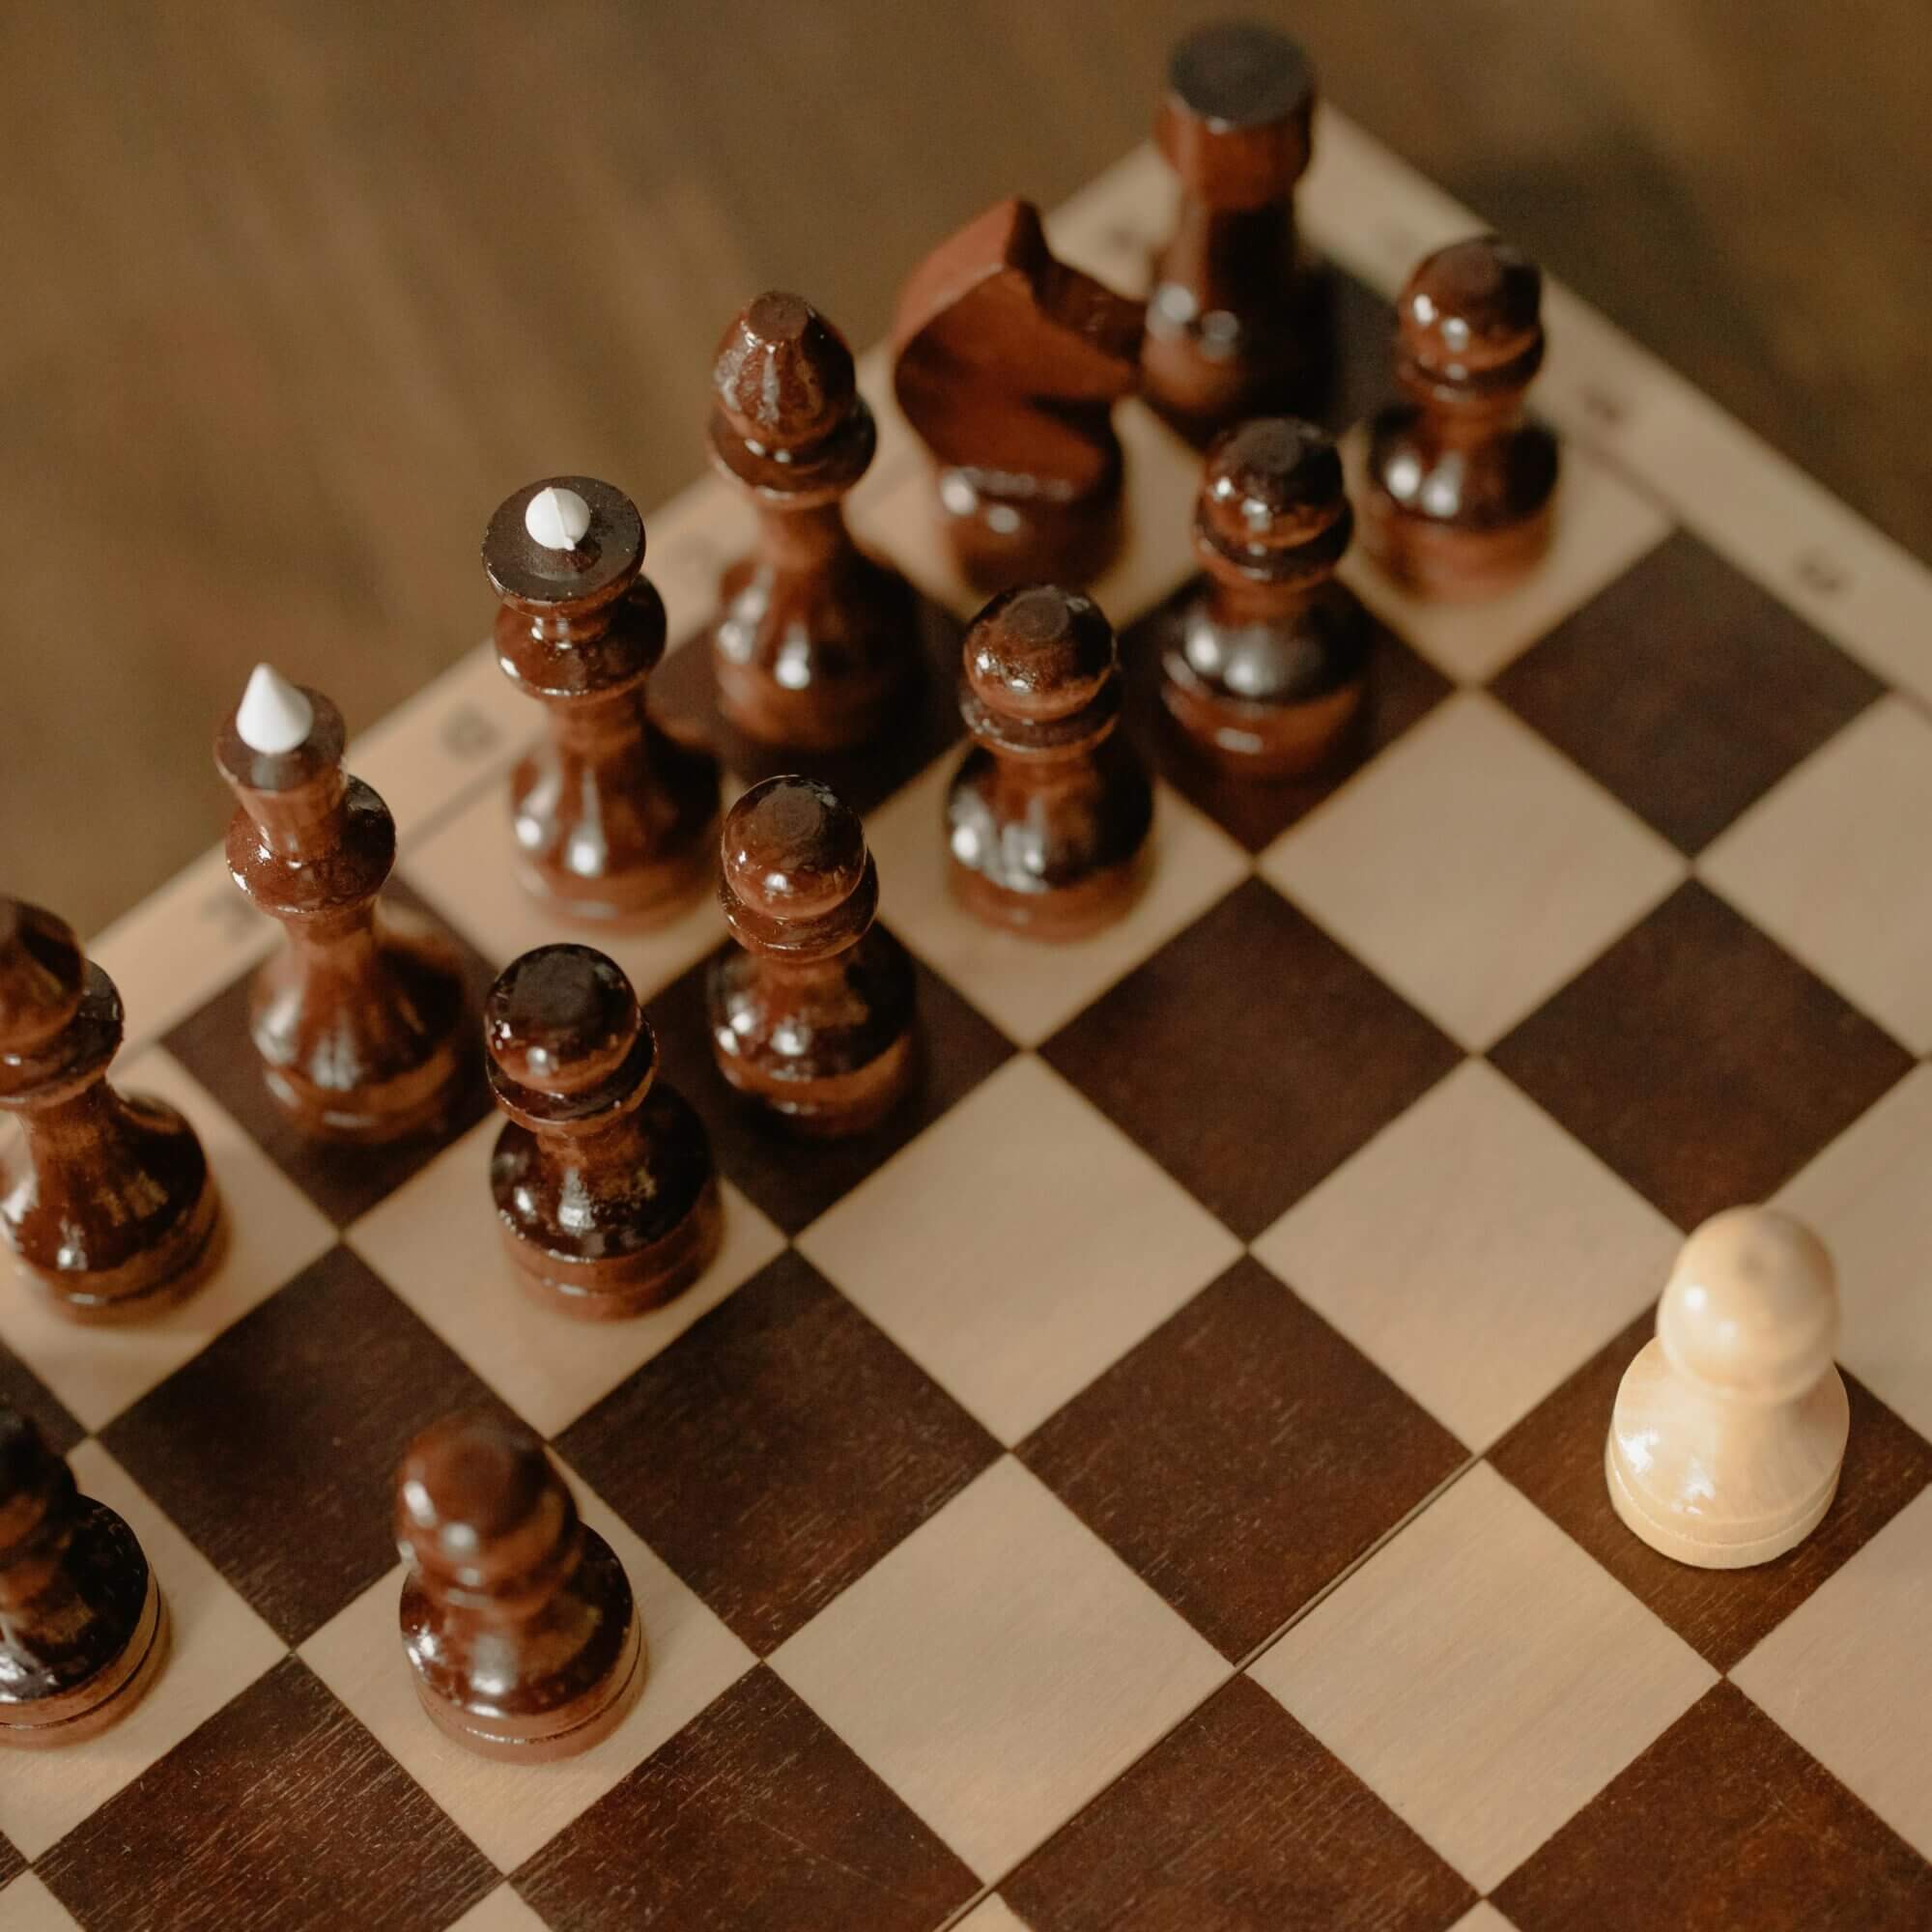 Chess pieces on a wooden chess board.